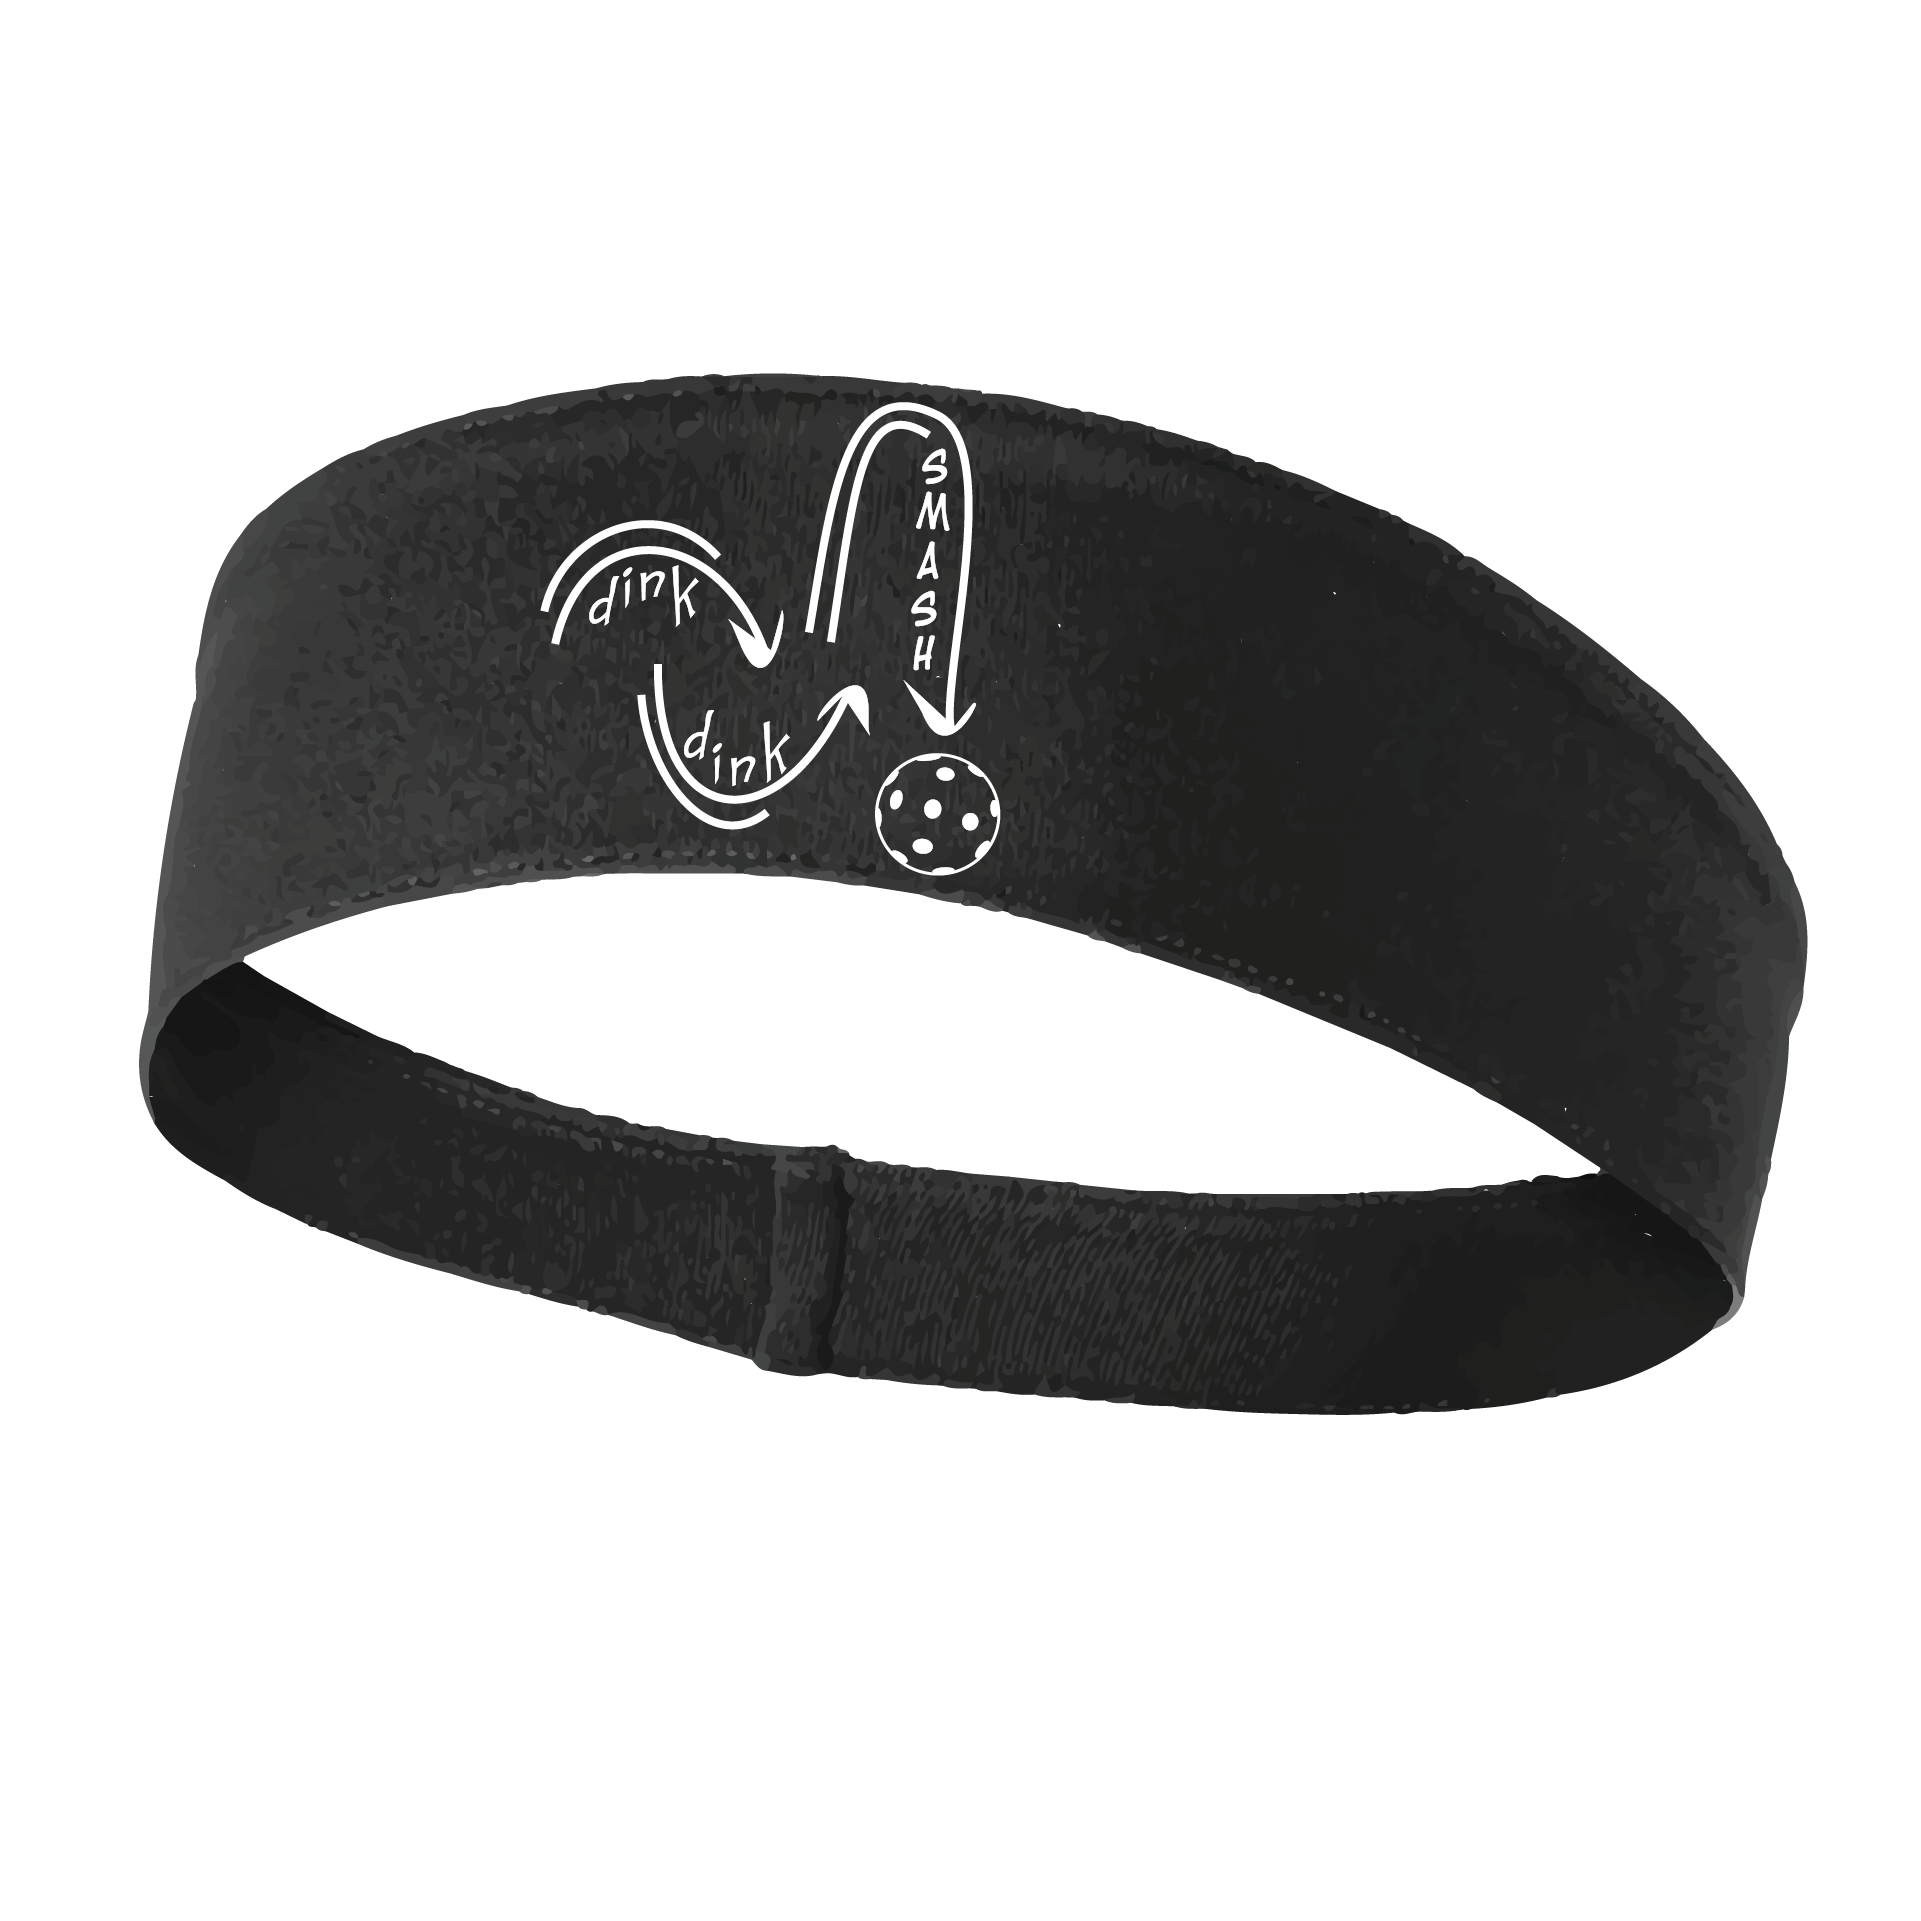 Pickleball Design: Dink Dink Smash in White  This fun, pickleball designed, moisture-wicking headband narrows in the back to fit more securely. Single-needle top-stitched edging. These headbands come in a variety of colors. Truly shows your love for the sport of pickleball!!